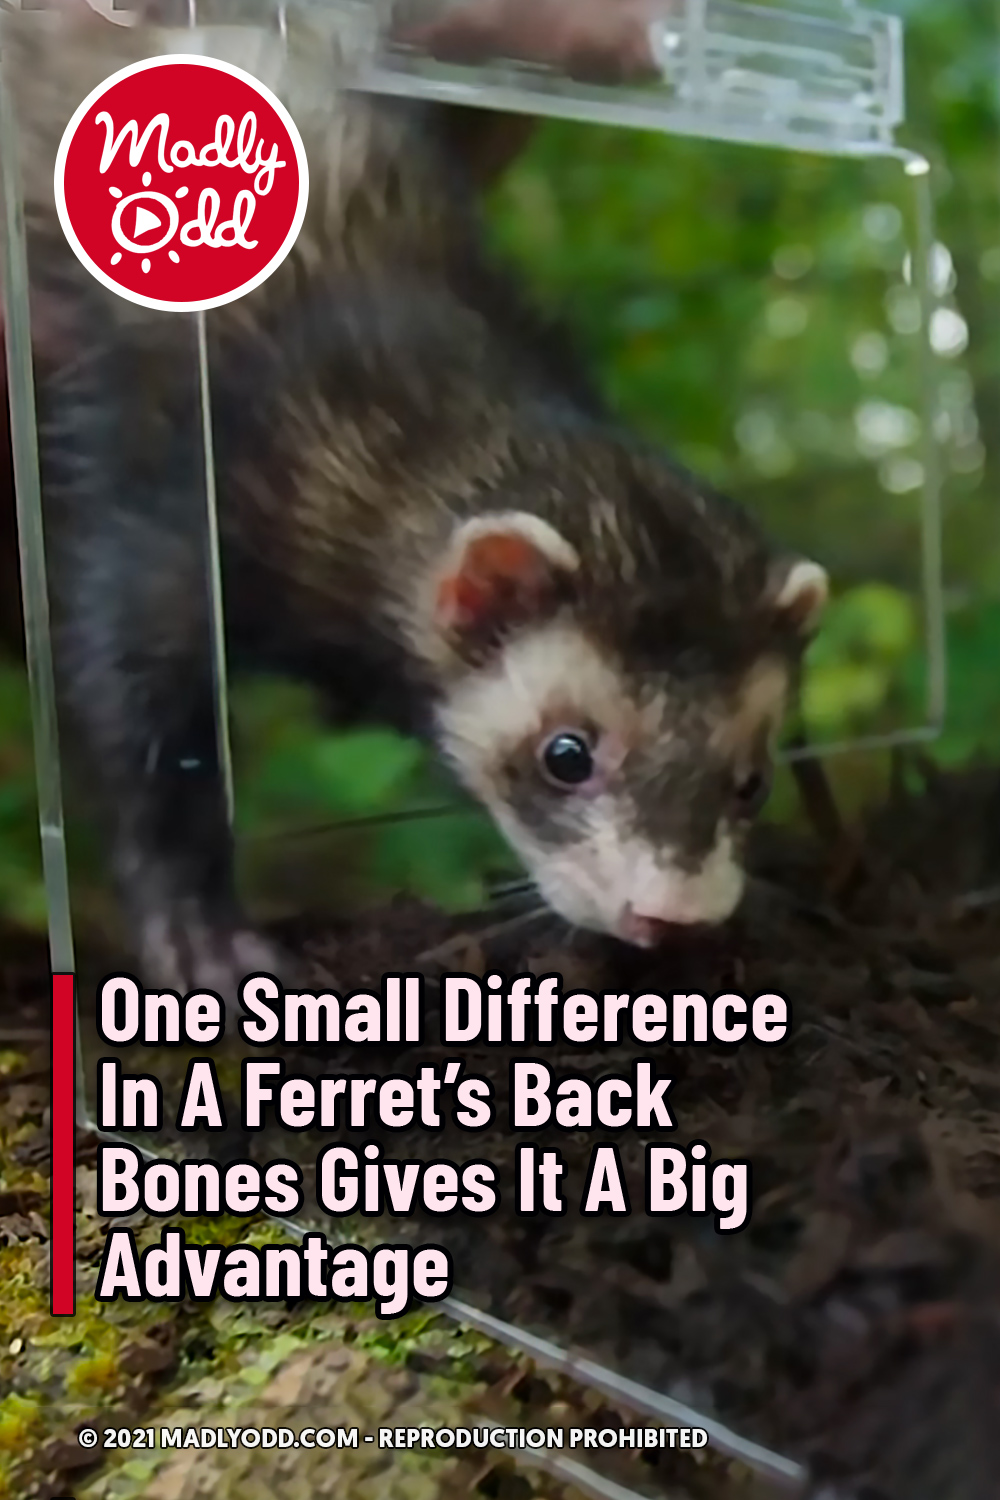 One Small Difference In A Ferret’s Back Bones Gives It A Big Advantage